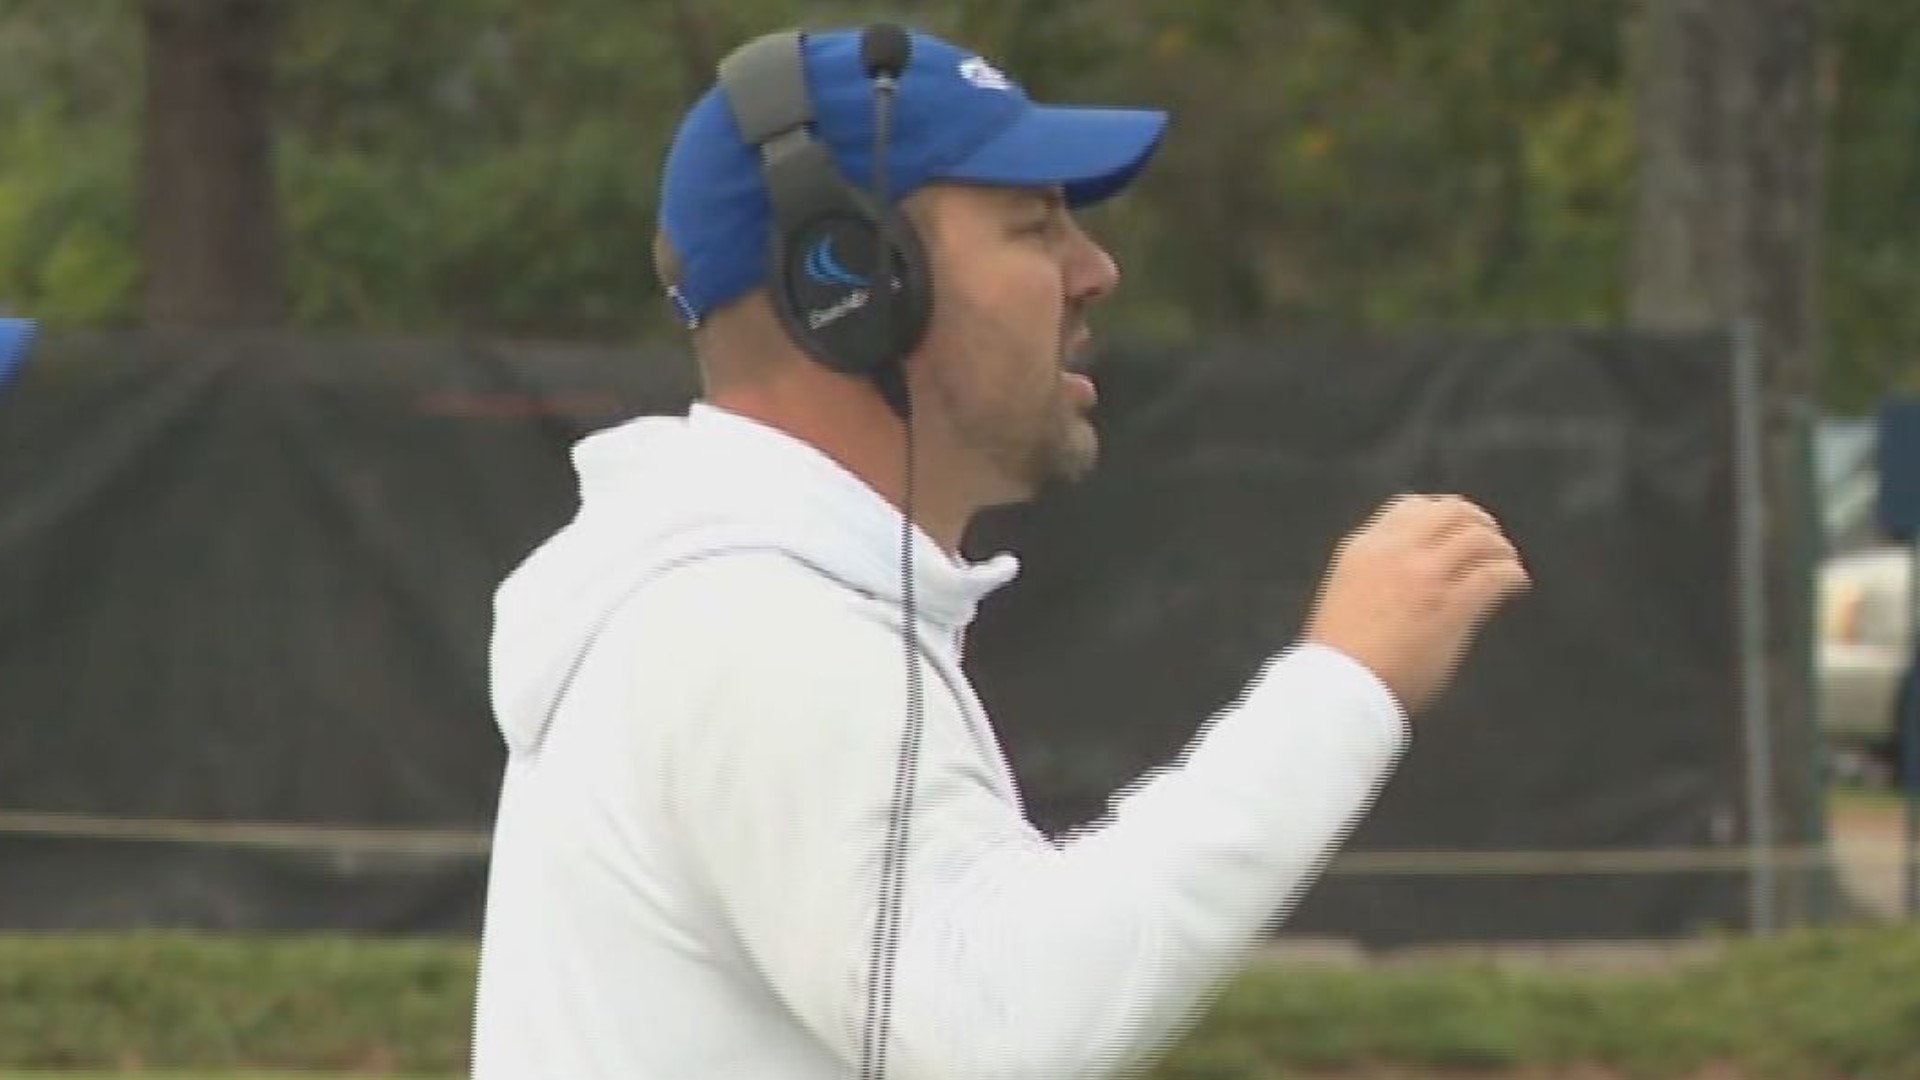 Art Link, who took over for CNU's first ever head coach Matt Kelchner in 2017, was 19-22 during his time at the school.